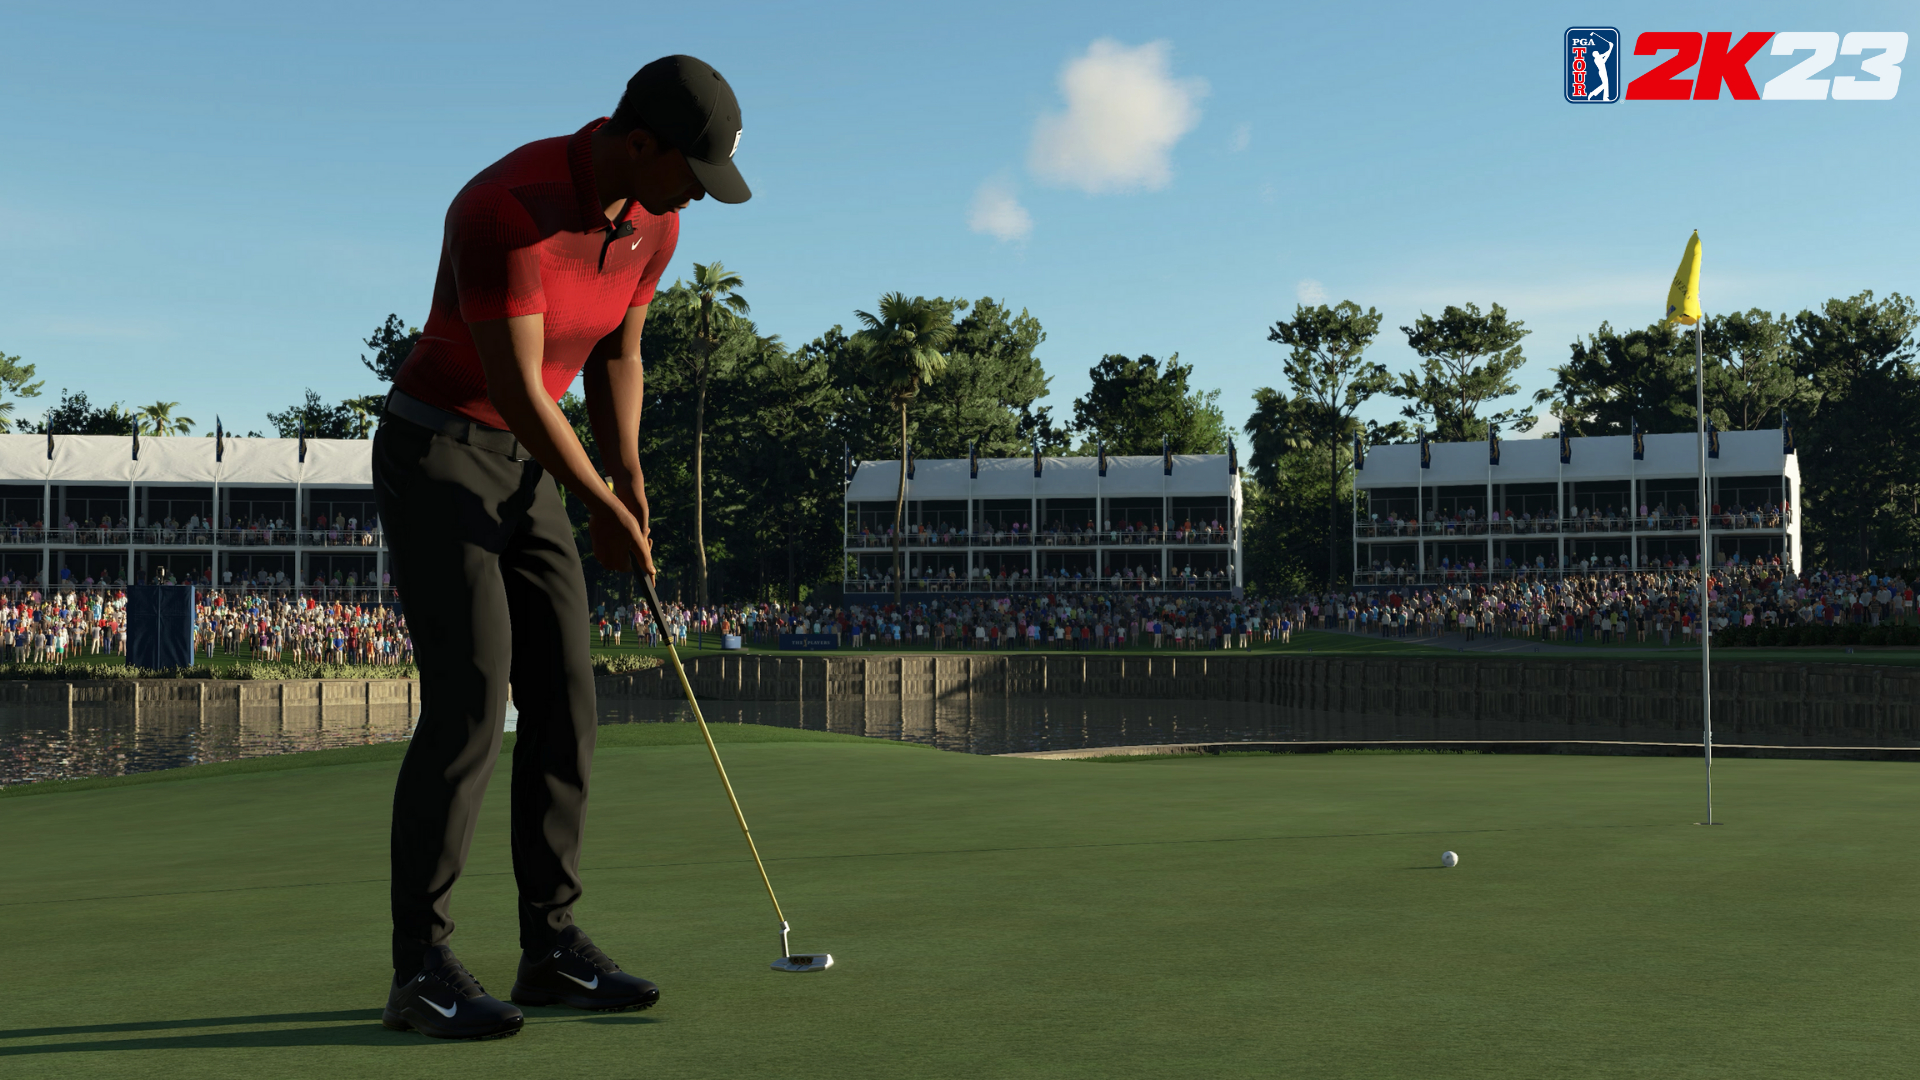 PGA TOUR 2K23 NOW AVAILABLE WORLDWIDE BRINGING PLAYERS MORE GOLF